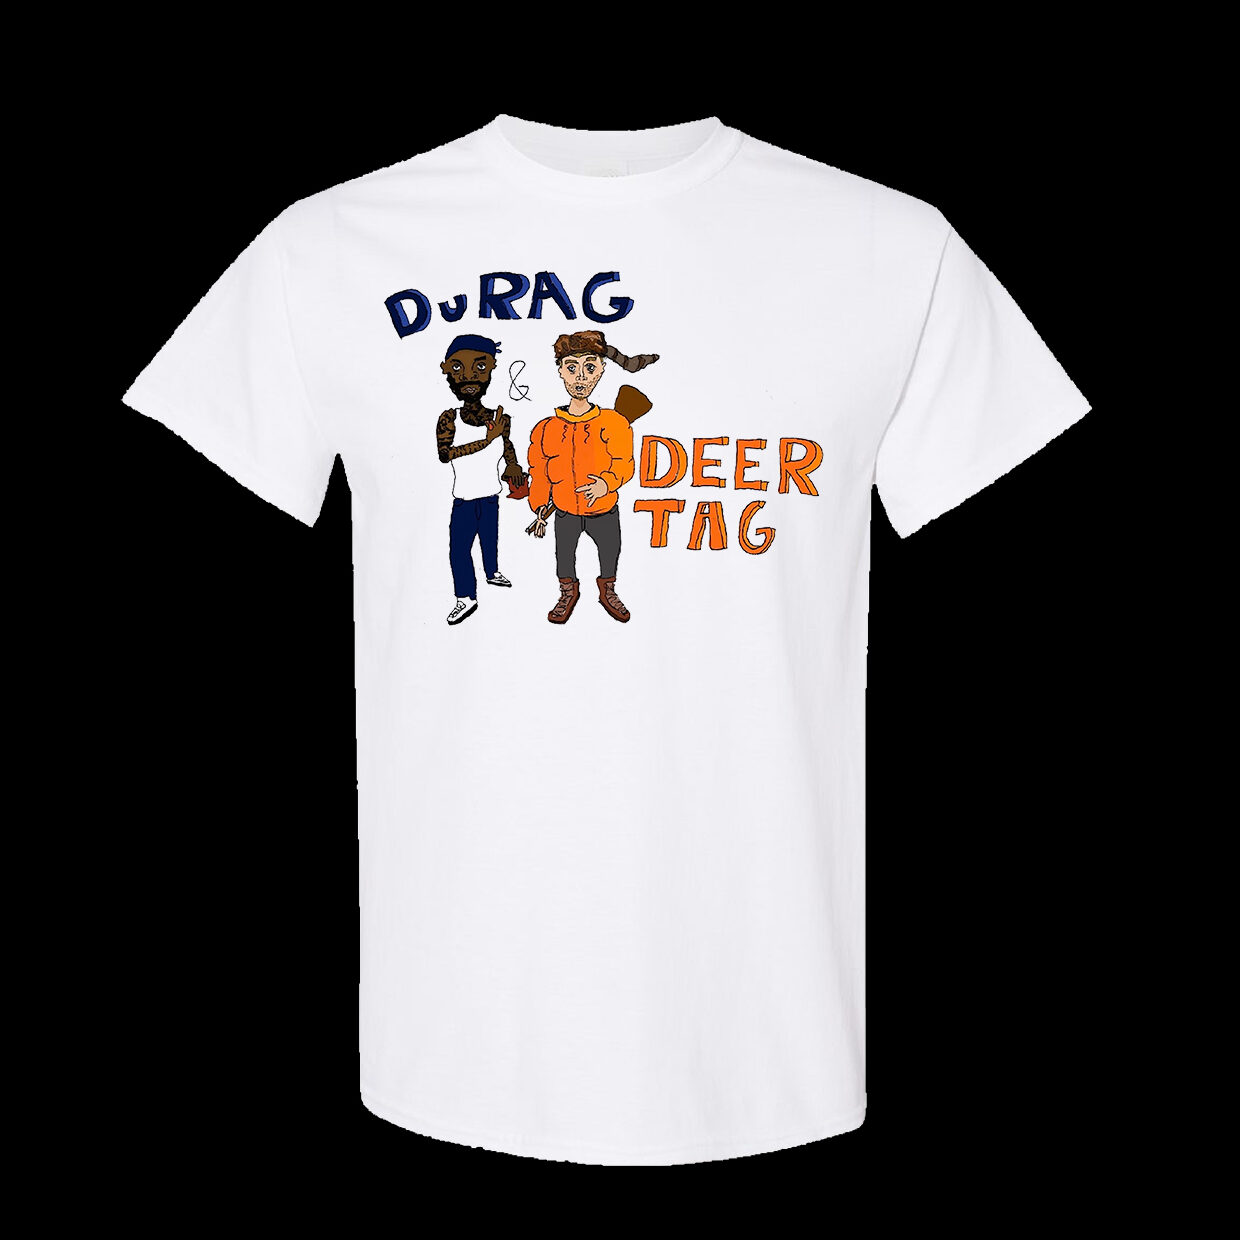 White T-shirt from the Durag and the Deer tag Podcast with the classic design